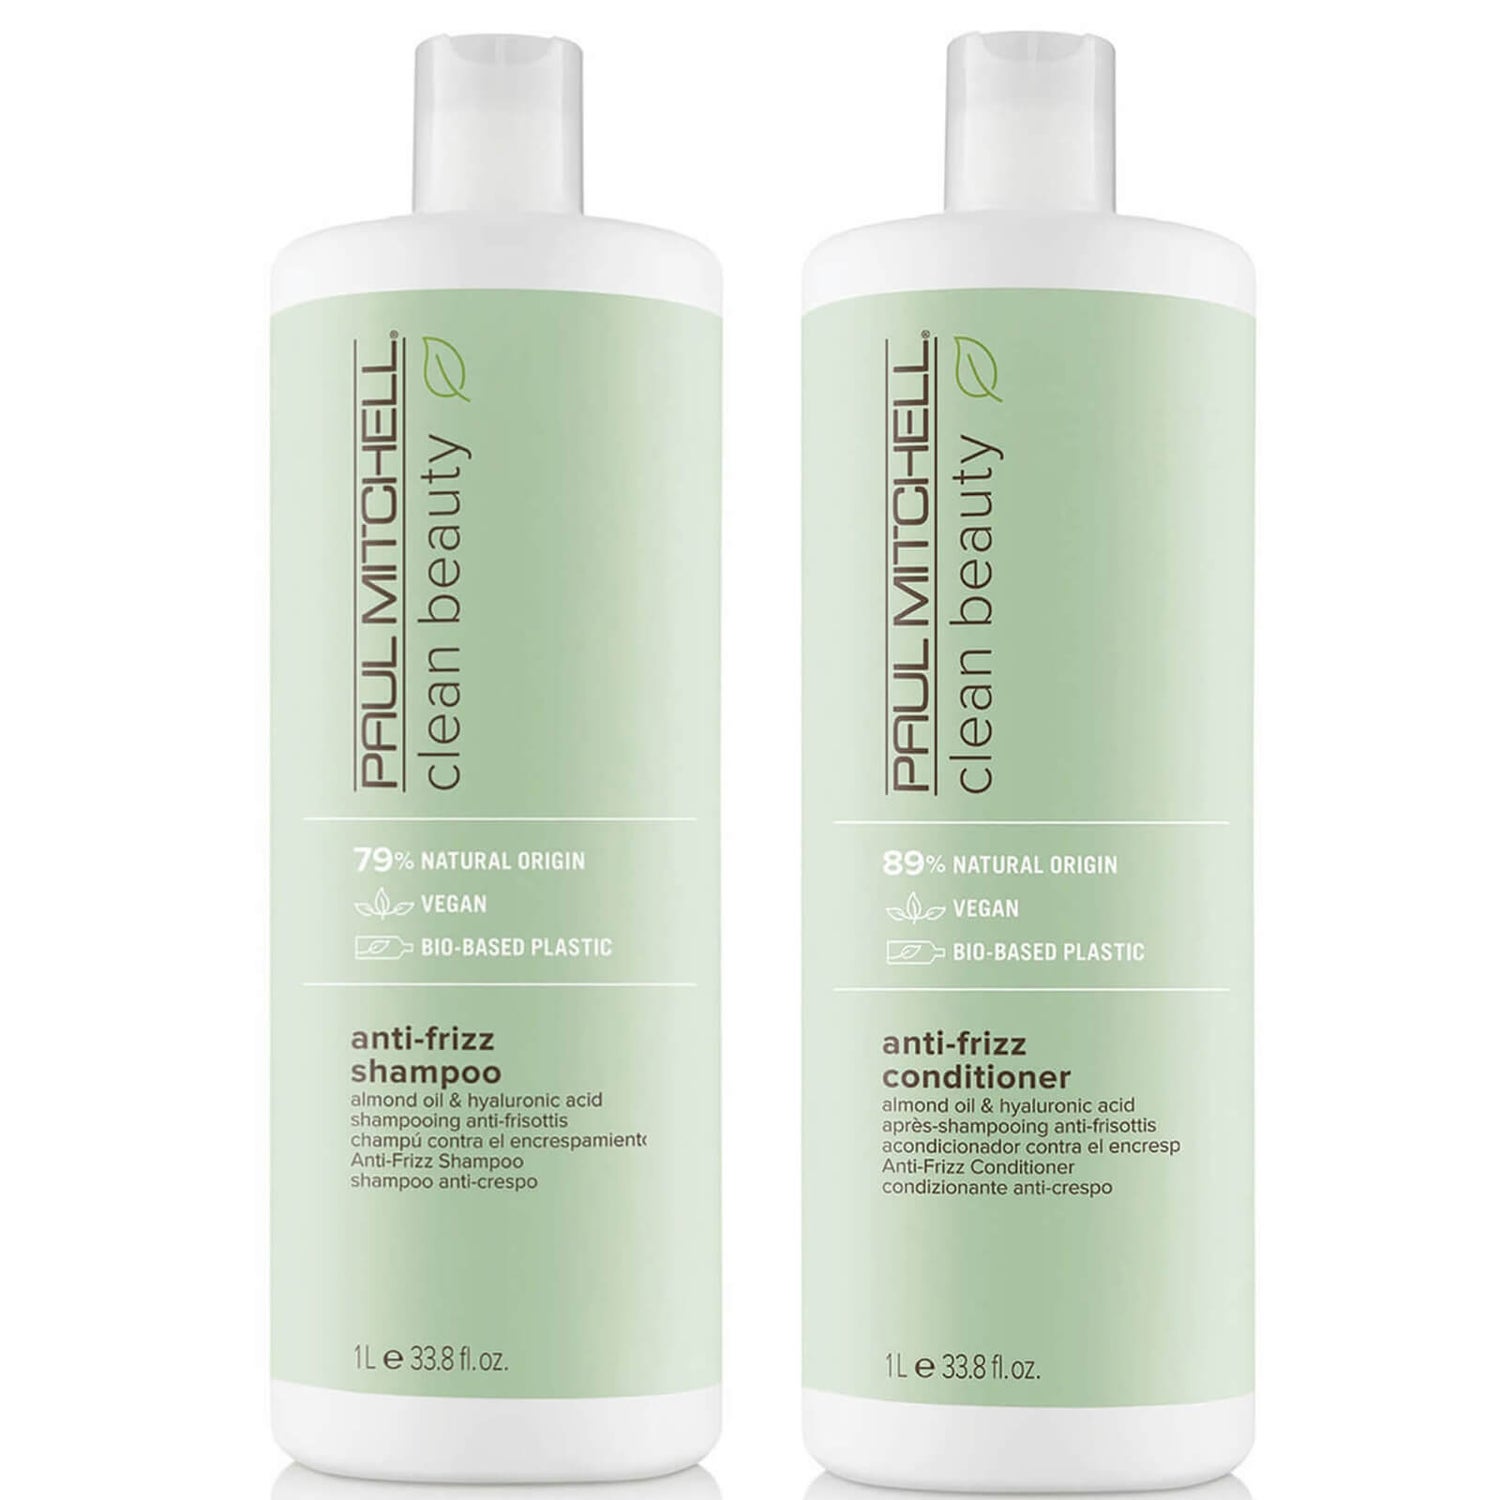 Paul Mitchell Clean Beauty Anti-Frizz Shampoo and Conditioner Supersize Set